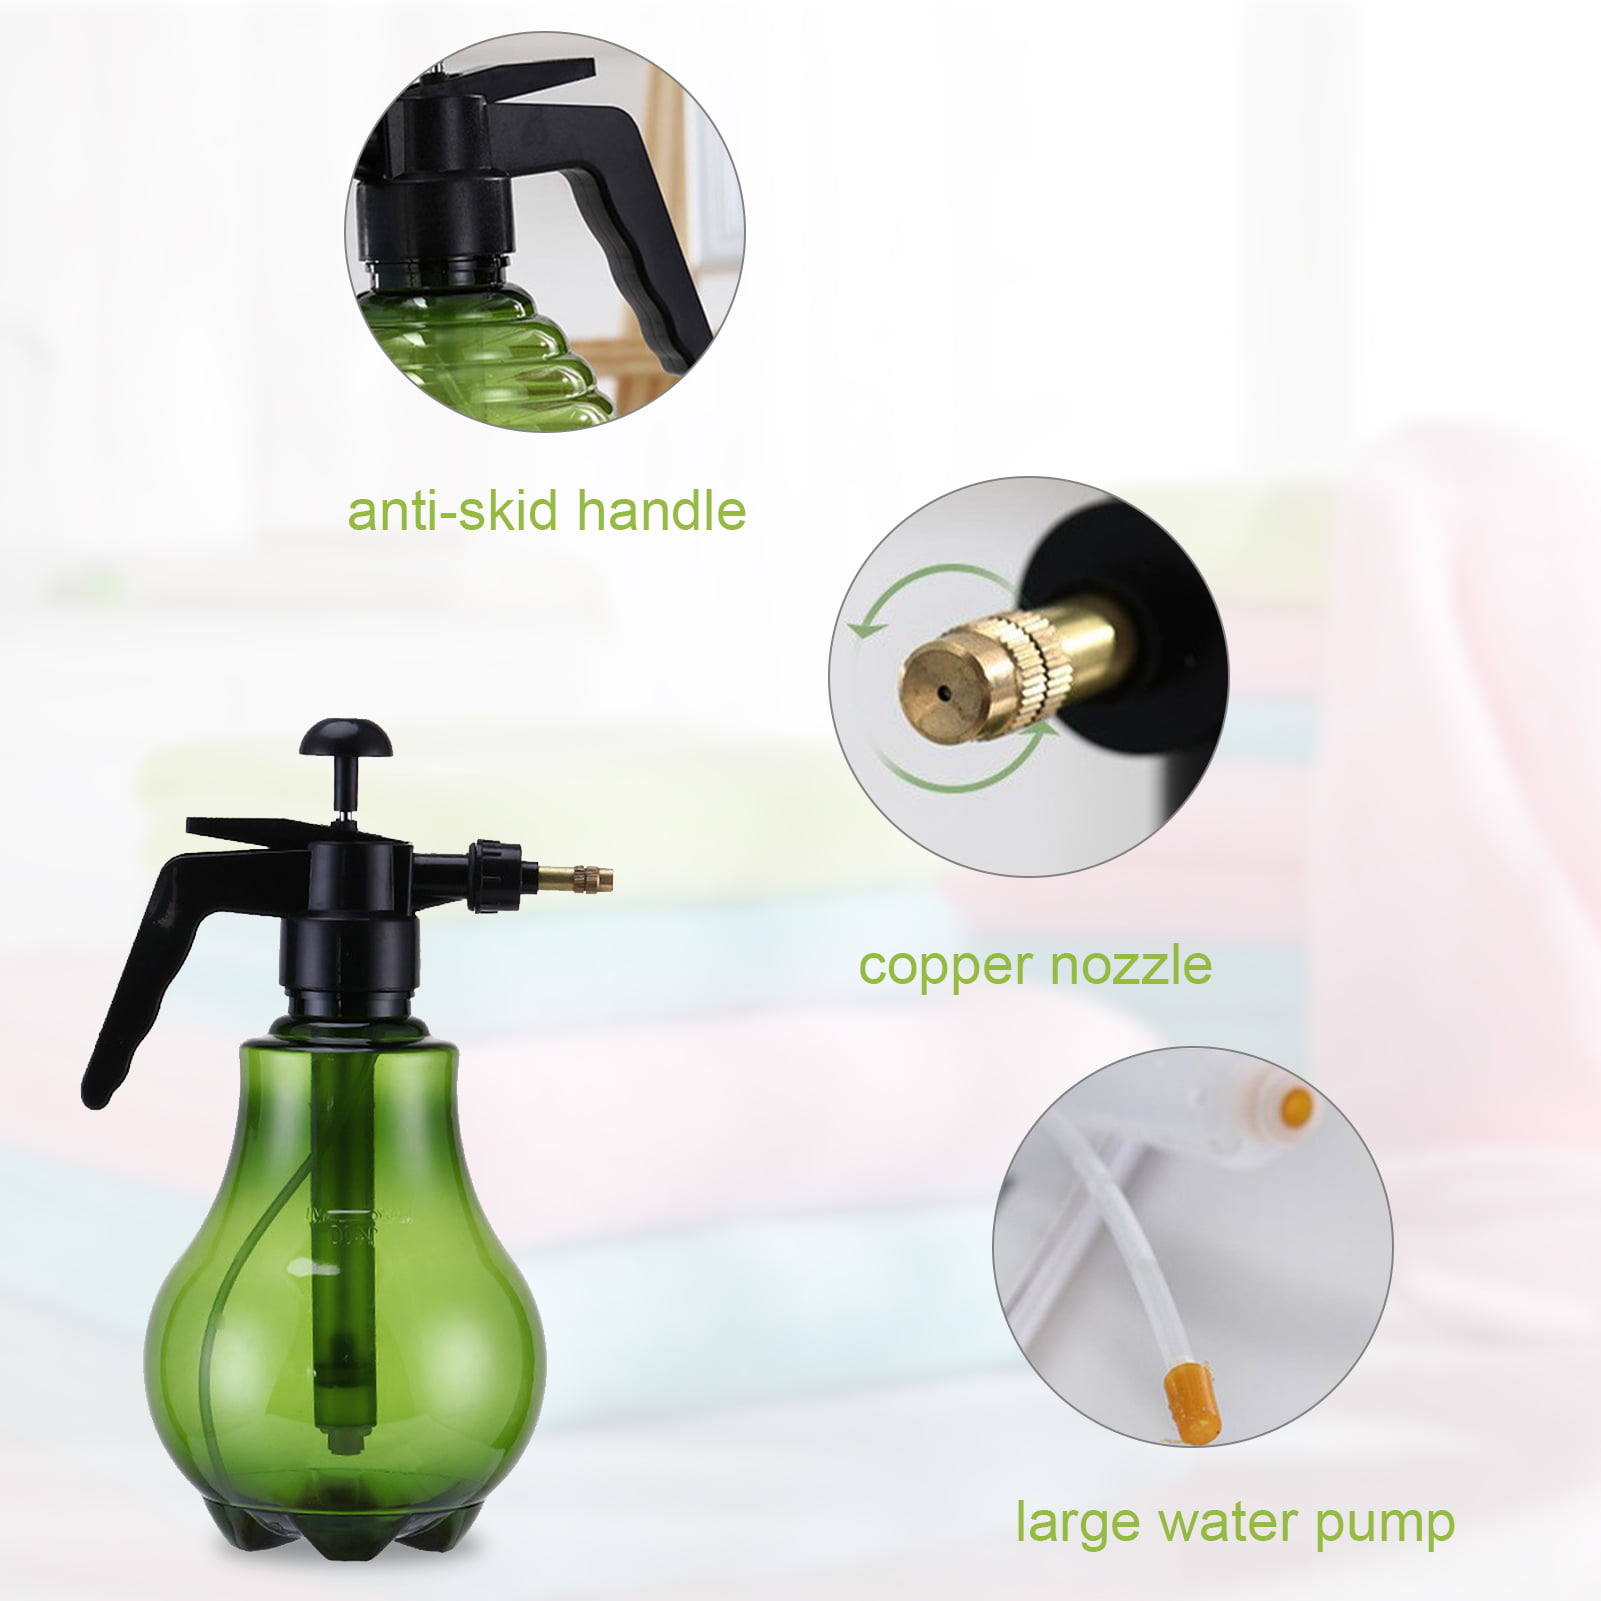 Details about  / 1.5L Household Flower Watering Pot Water Spray Can Hand Pressure Mist Sprayer